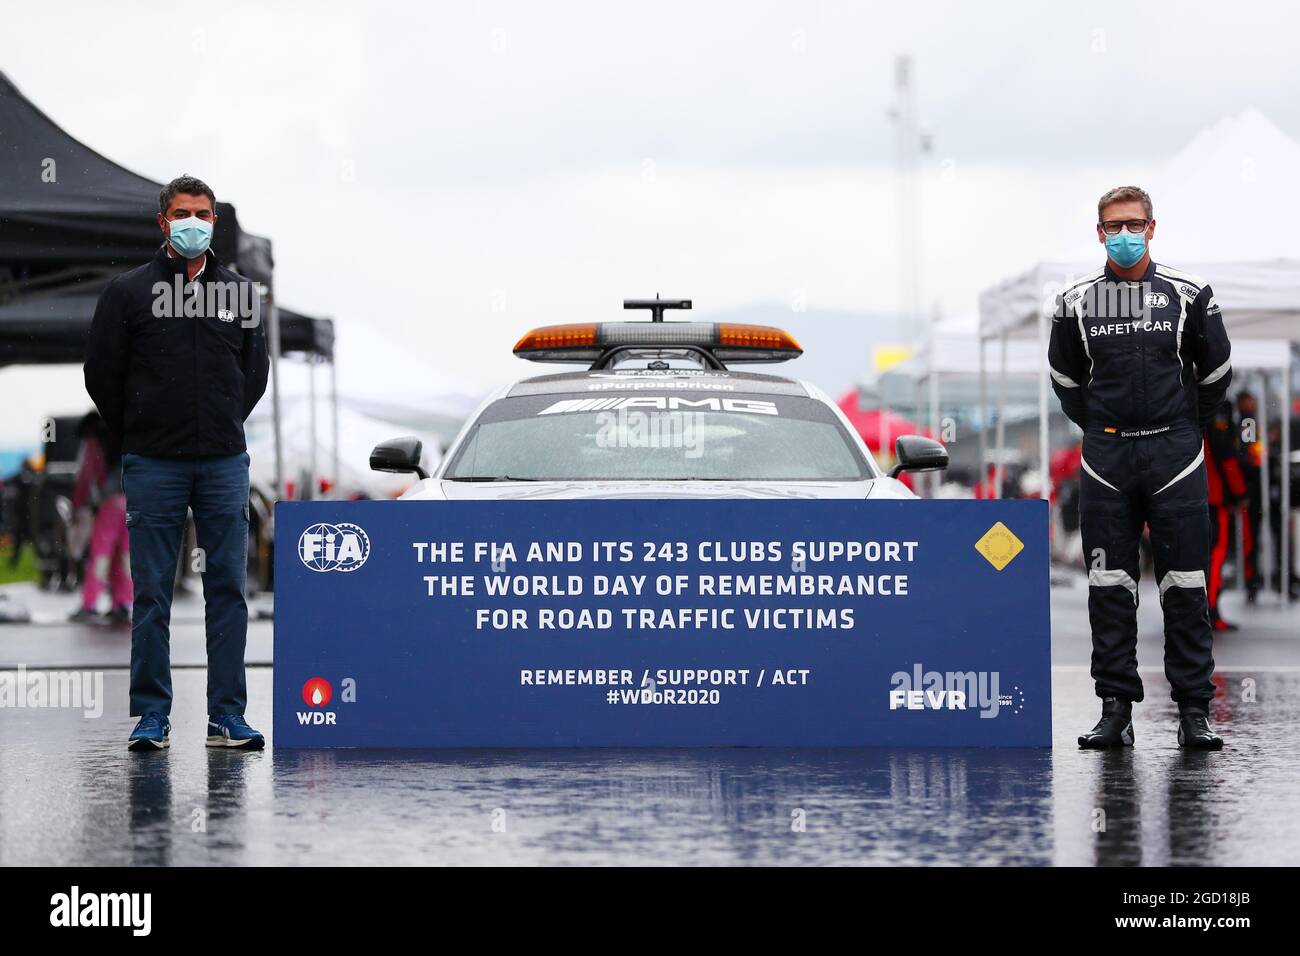 Michael Masi (AUS) FIA Race Director and Bernd Maylander (GER) FIA Safety Car Driver support the Day of Remembrance for Road Traffic Victims. Turkish Grand Prix, Sunday 15th November 2020. Istanbul, Turkey. Stock Photo